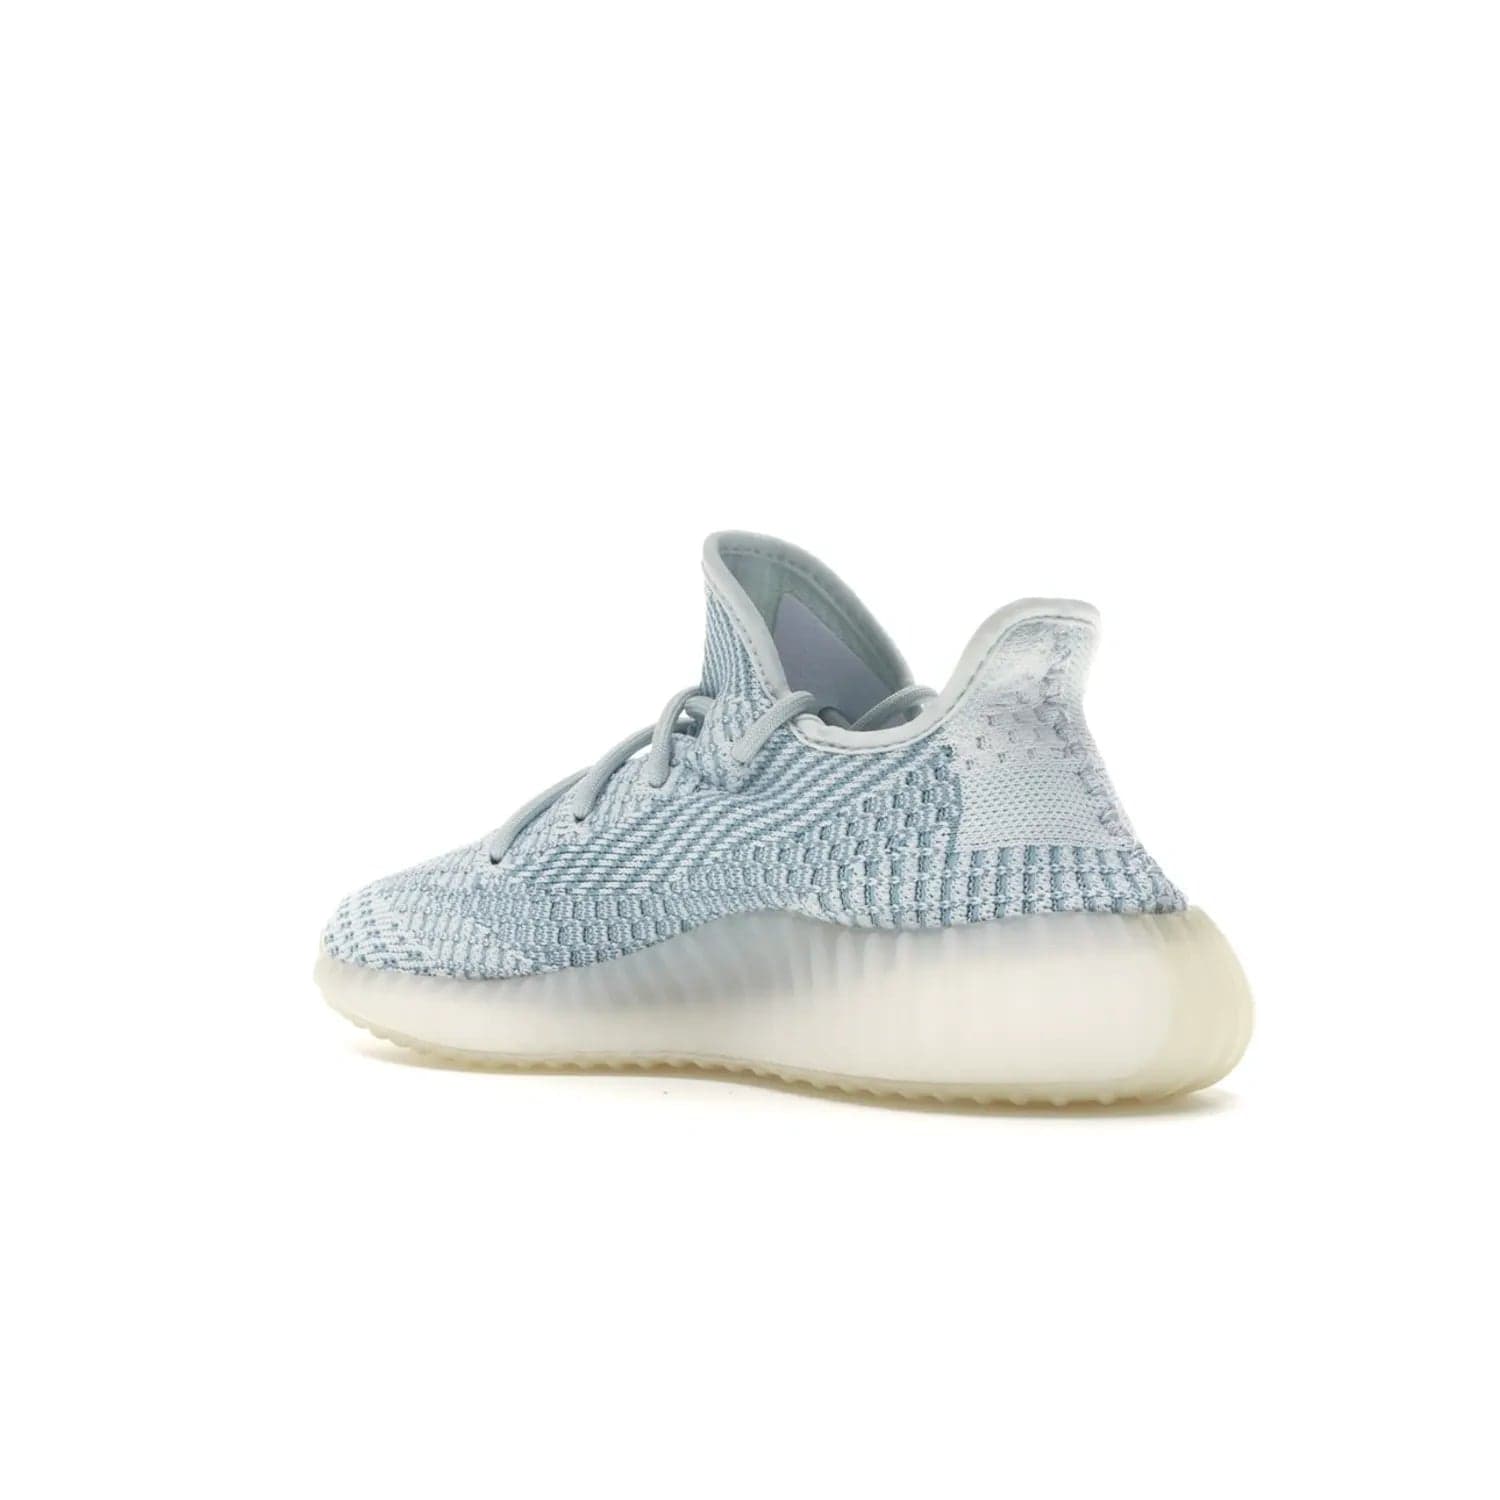 adidas Yeezy Boost 350 V2 Cloud White (Non-Reflective) - Image 23 - Only at www.BallersClubKickz.com - Adidas Yeezy Boost 350 V2 Cloud White (Non-Reflective) features Primeknit fabric and a unique, eye-catching design of cream, bluish-white, and transparent strip. Step out in timeless style with this eye-catching sneaker.